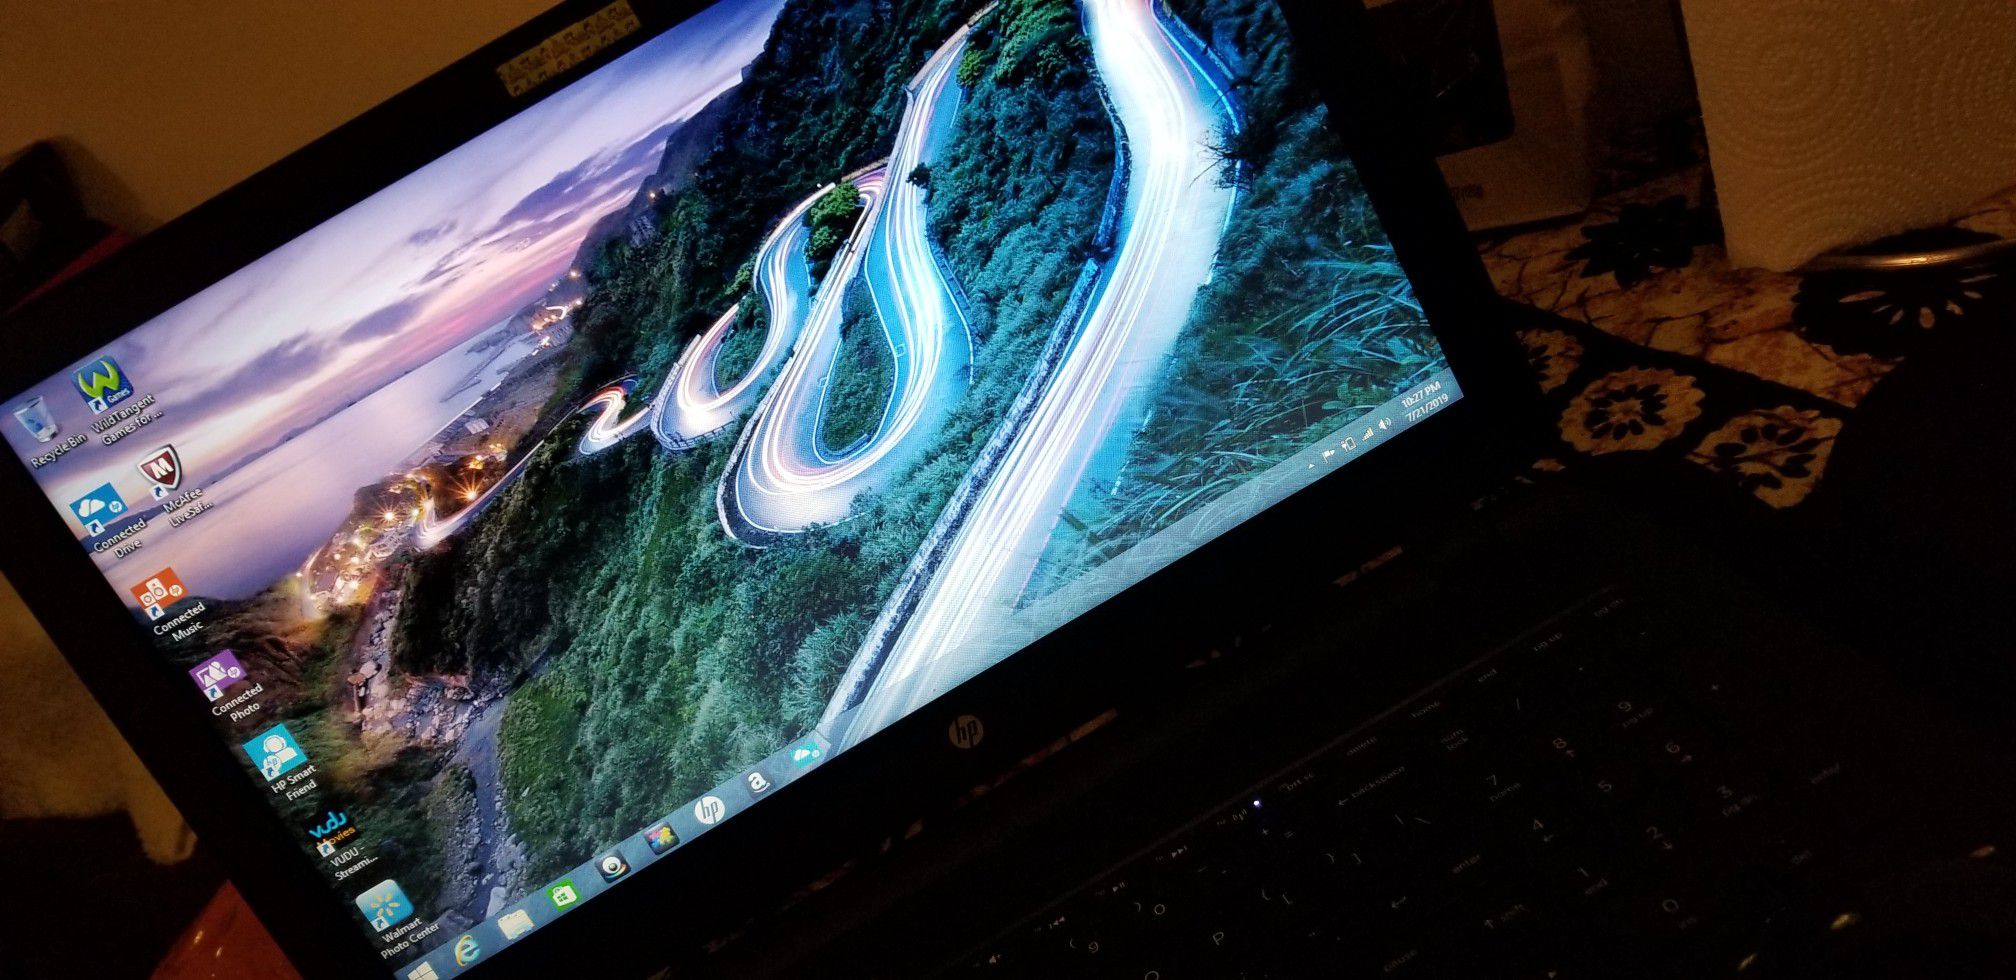 "STILL AVAILABLE" -HMU- HP Notebook laptop for sale/17.1 inch screen